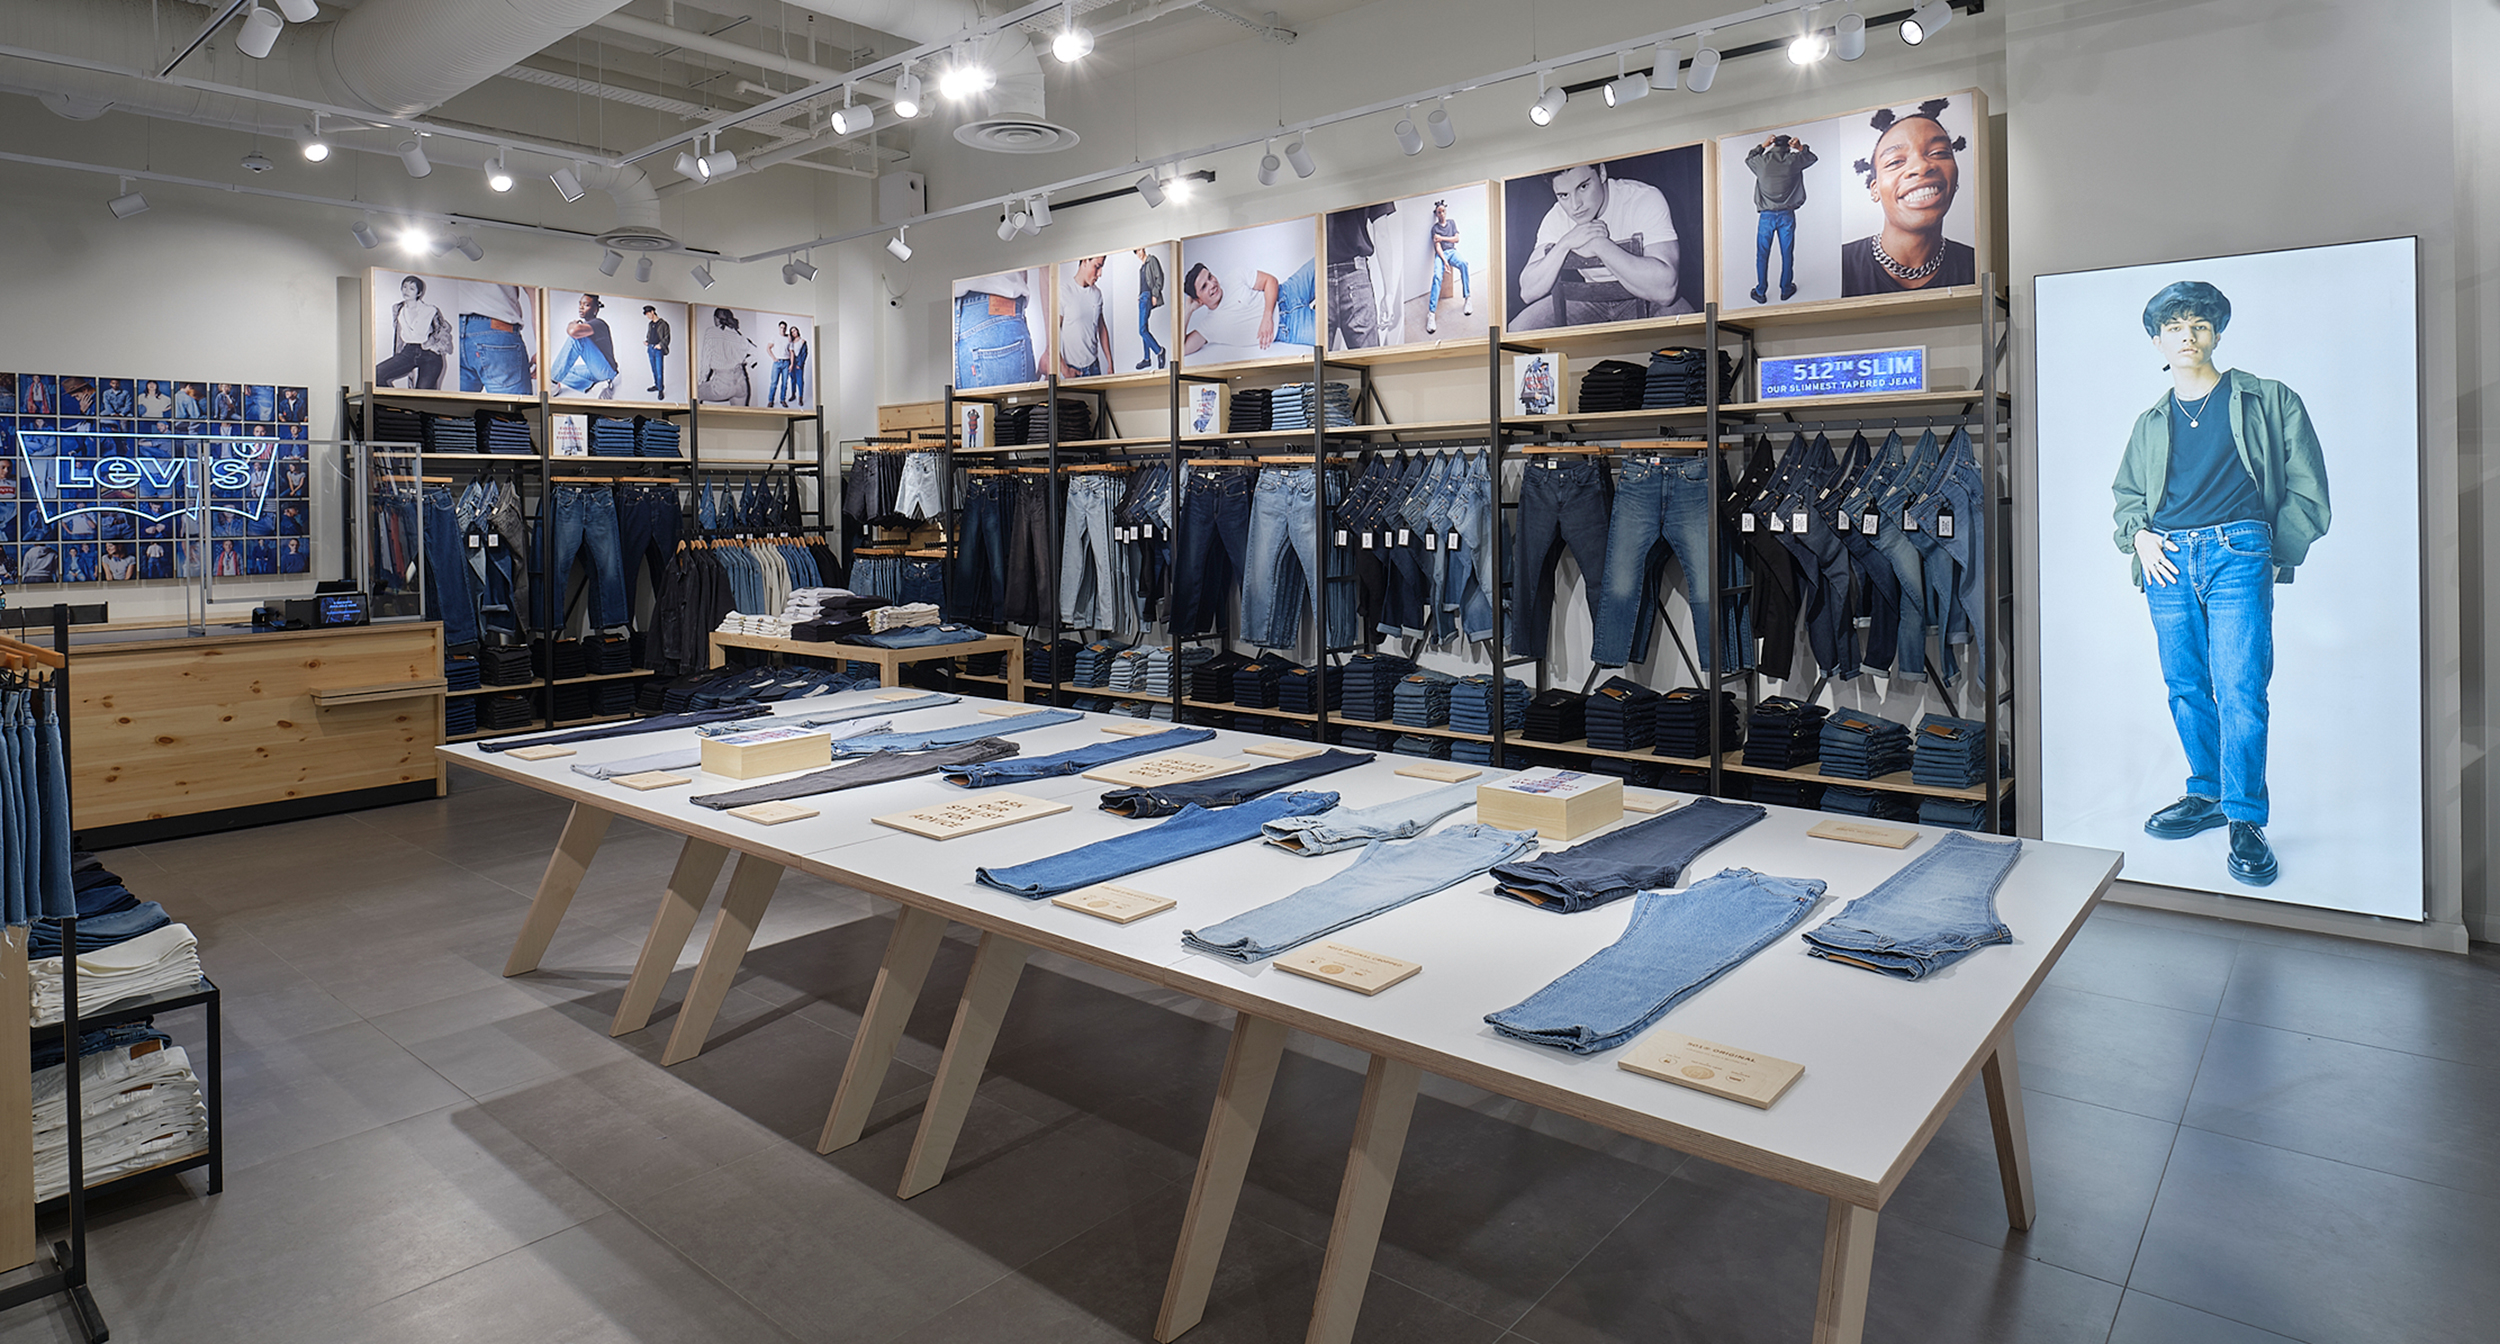 Levi's Shifts VM Strategy for Bigger Focus on Jeans – Visual Merchandising and Store